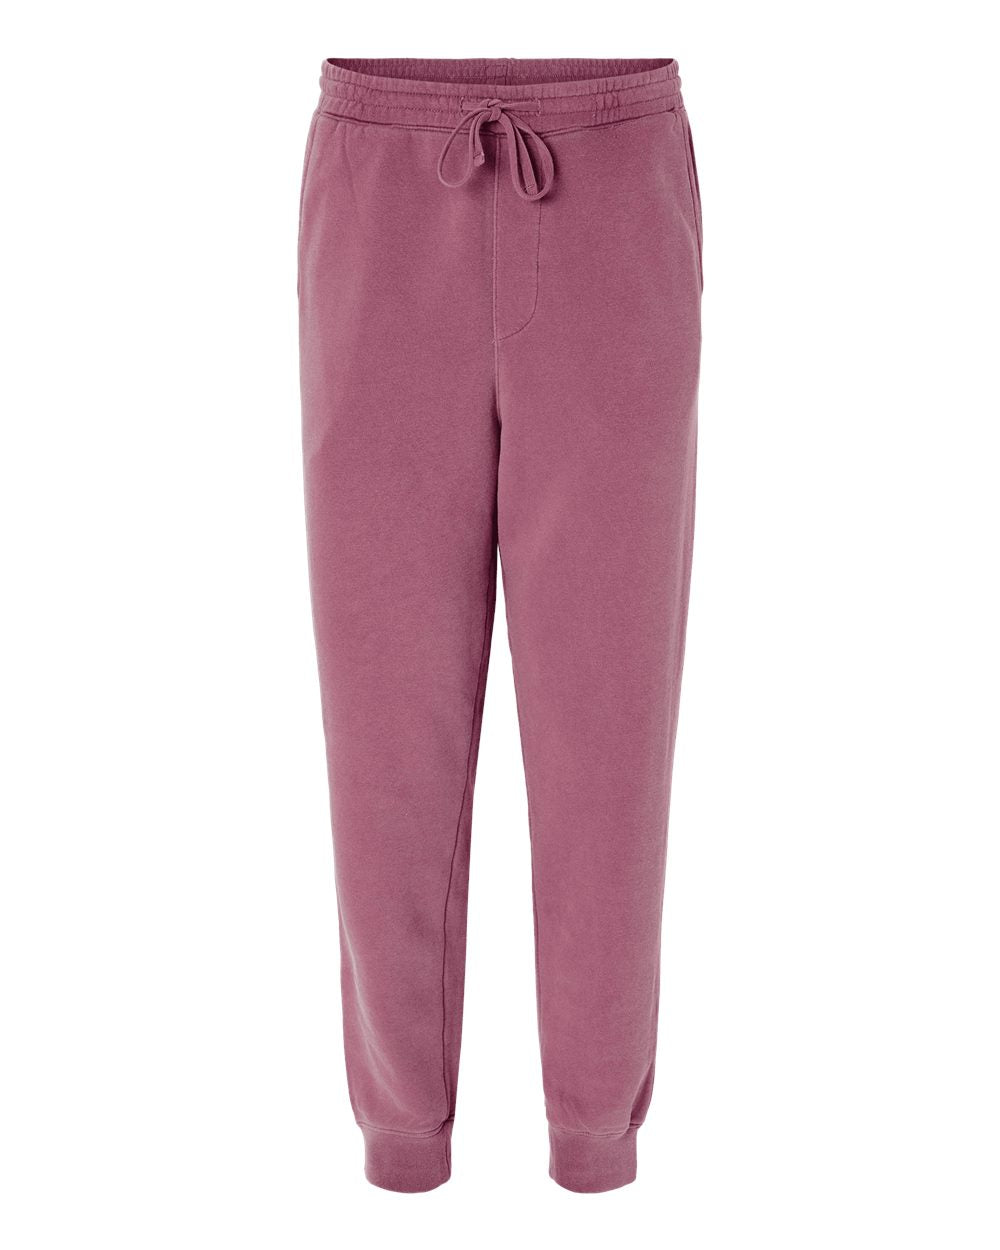 Independent Trading Co. Pigment-Dyed Fleece Pants PRM50PTPD #color_Pigment Maroon